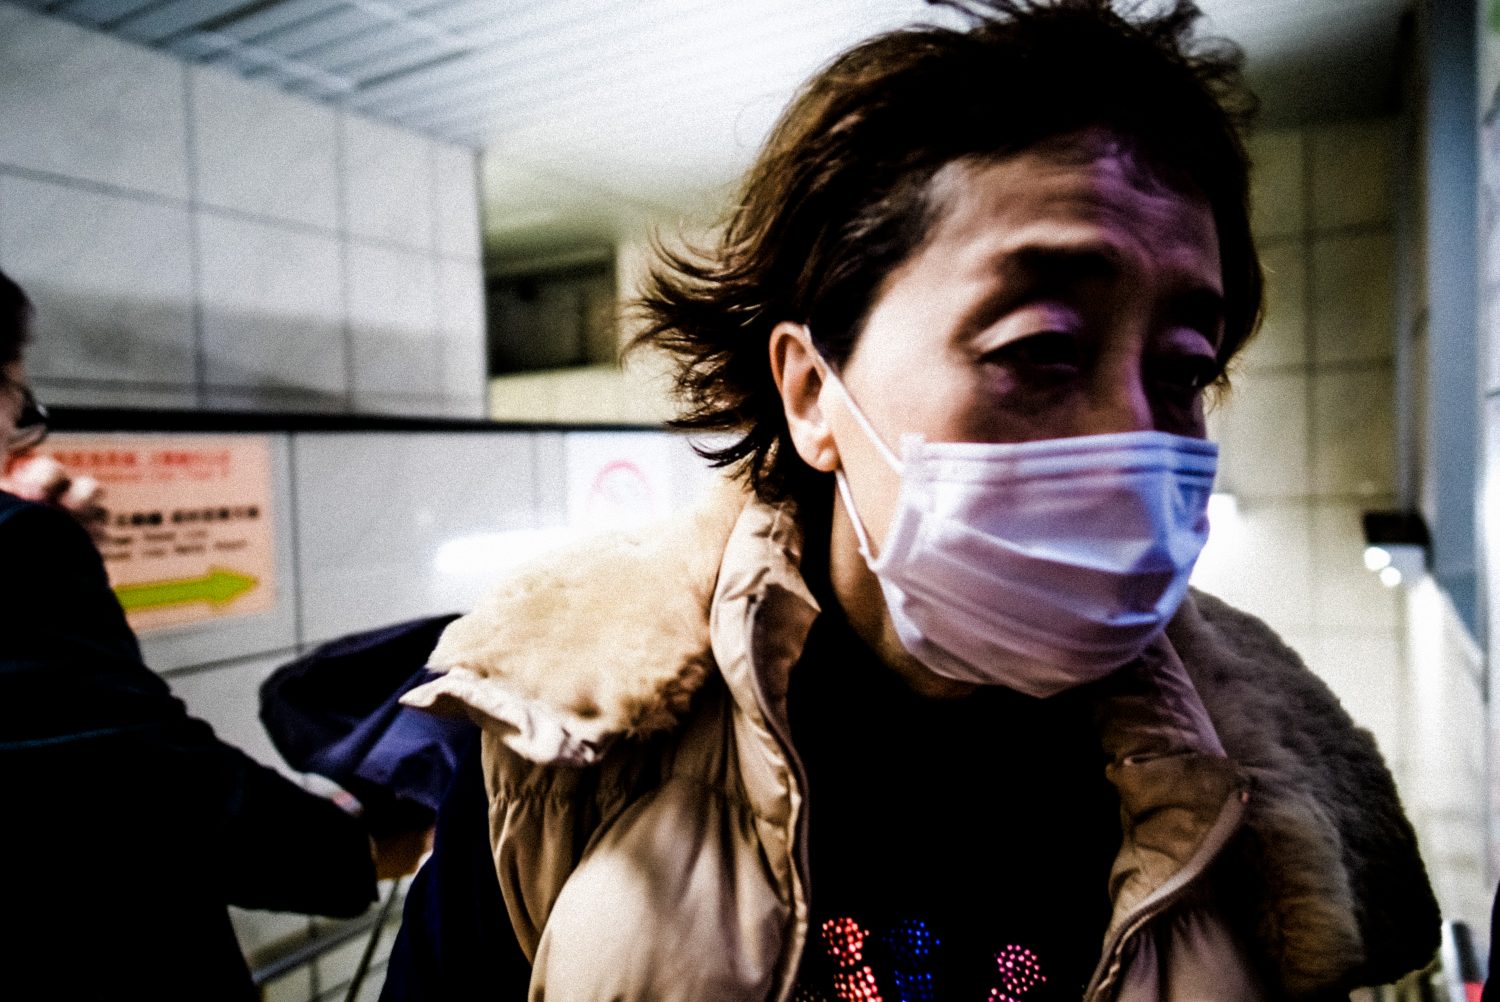 Woman with face mask in Tokyo subway. 2018